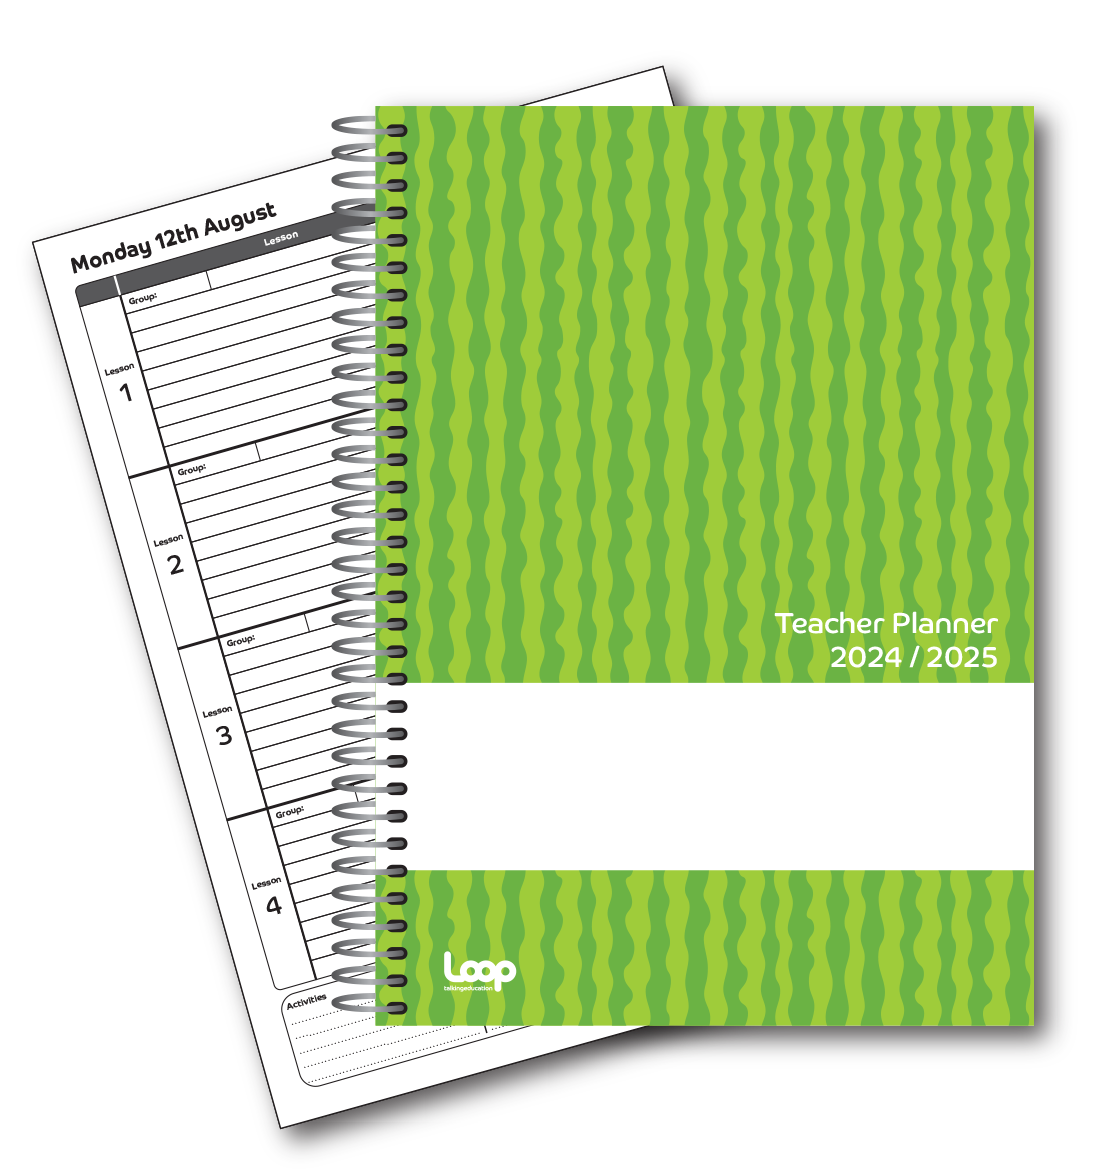 4 Lesson Dated Teacher Planner A4 Size